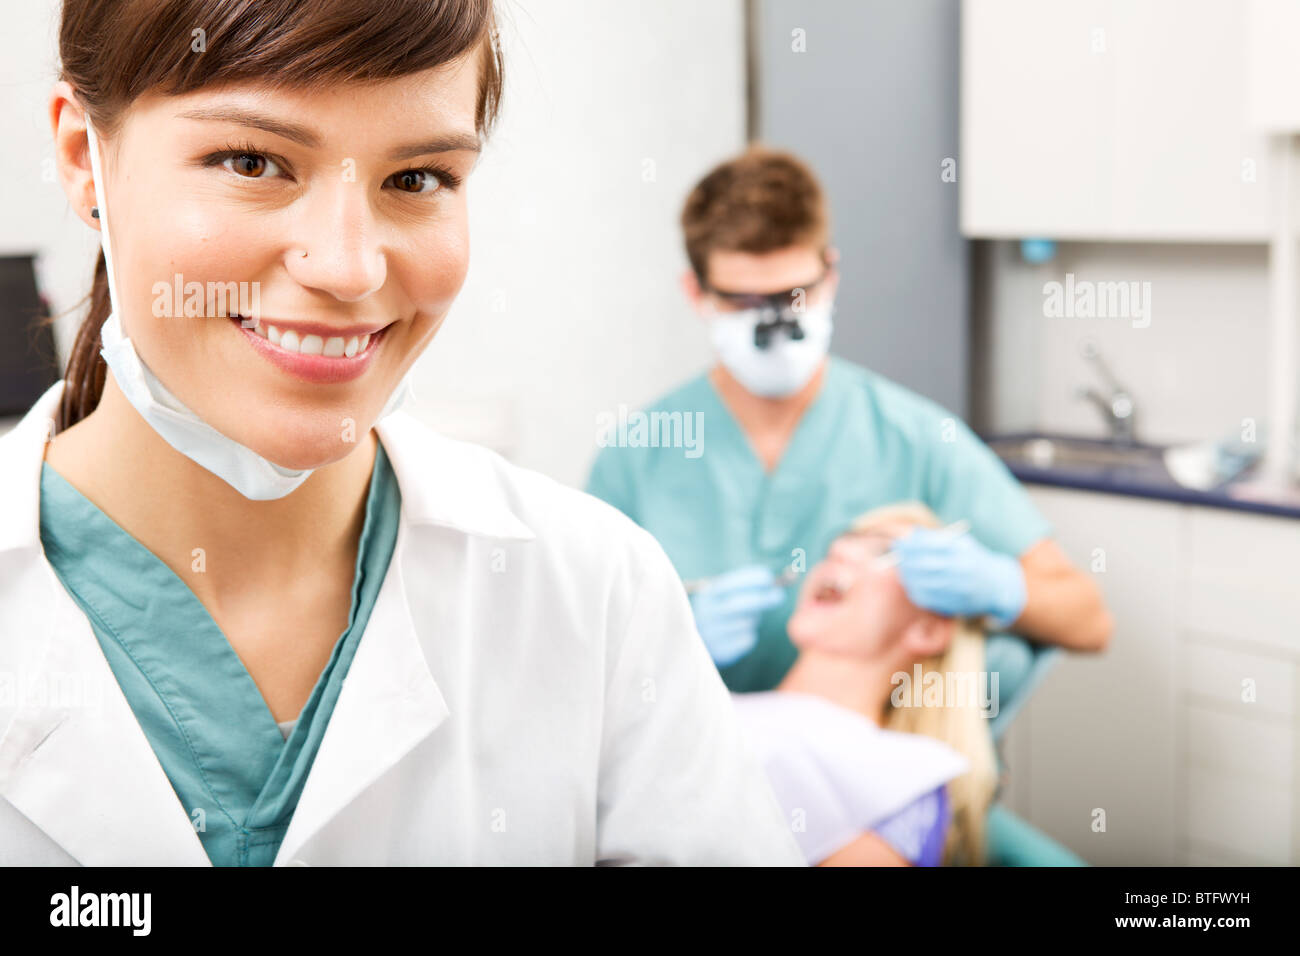 A portrait of a dental assistant smiling at the camera with the dentist working in the background Stock Photo